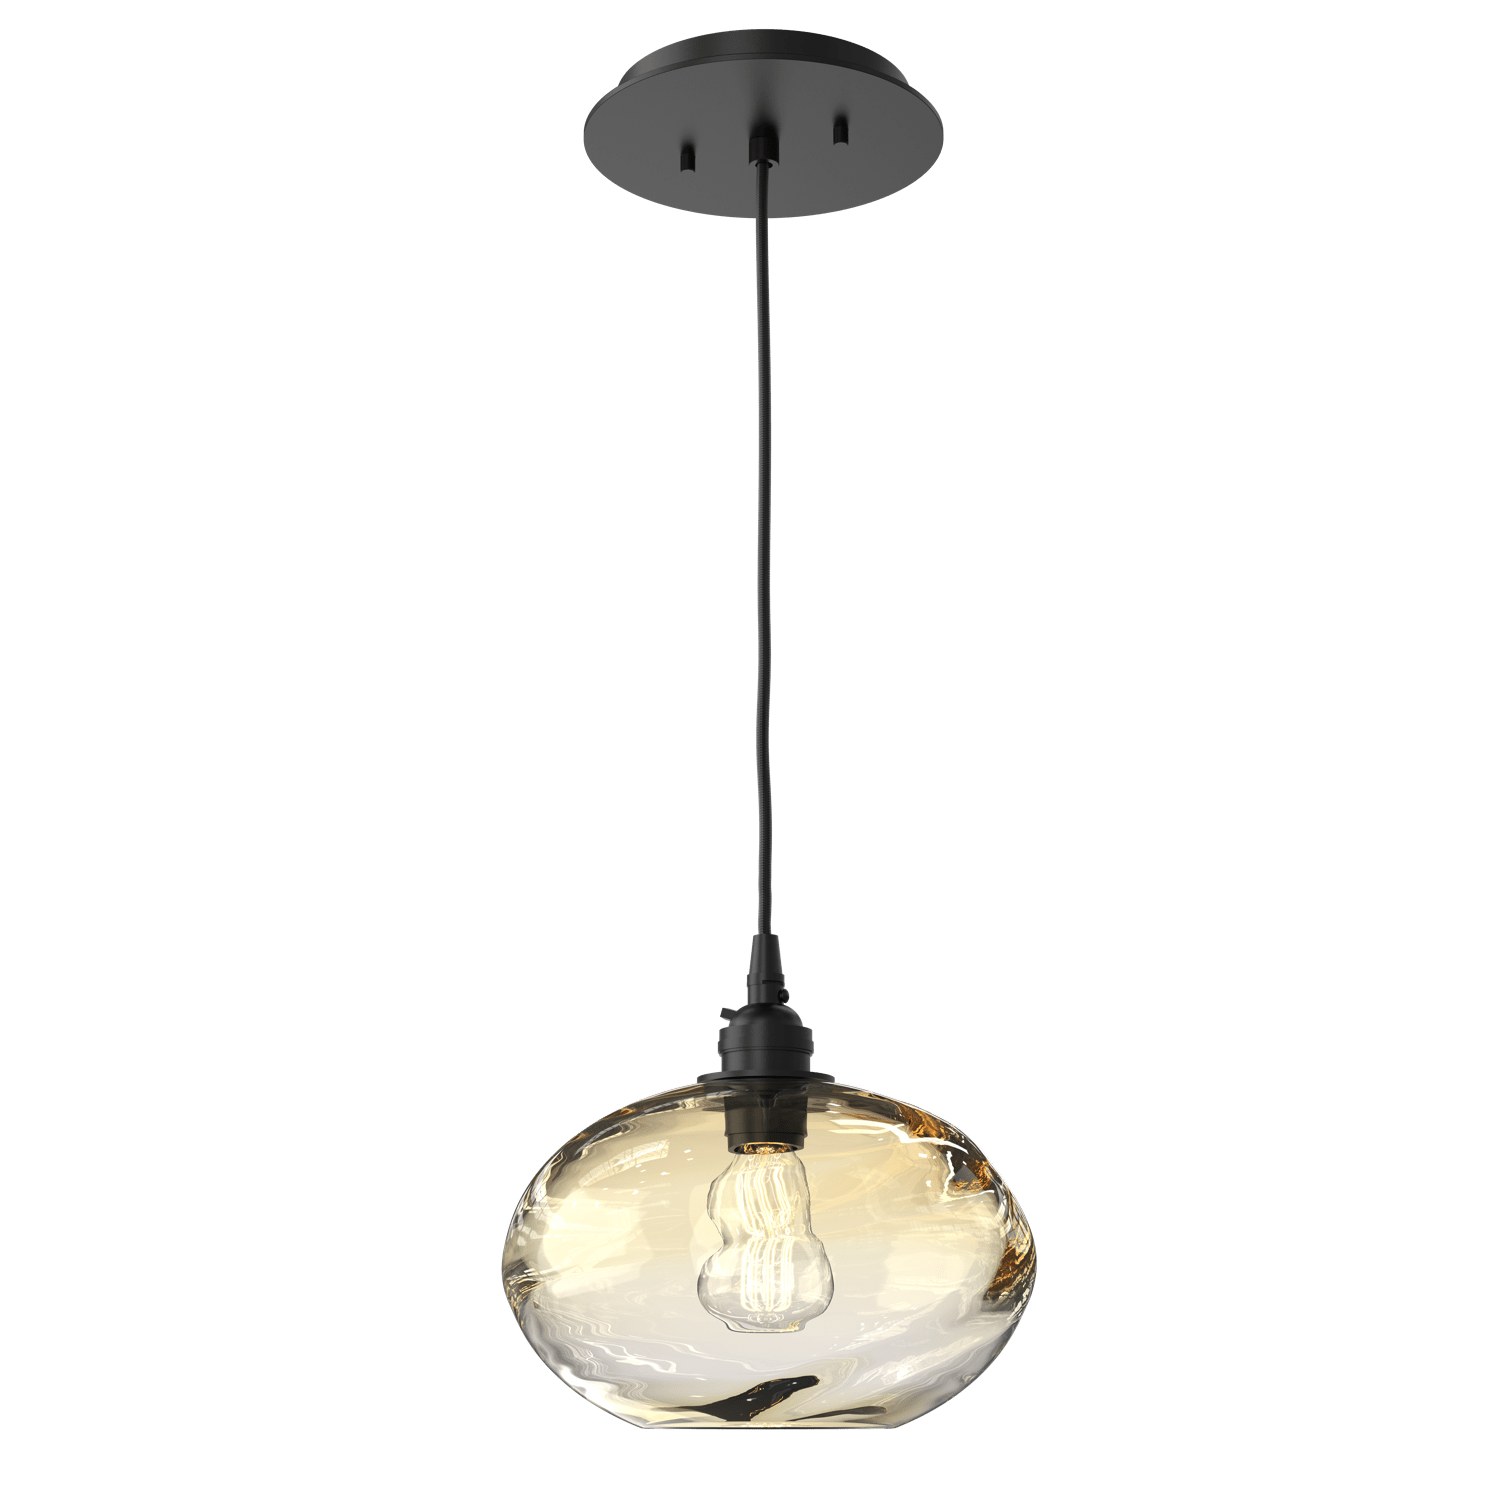 LAB0036-01-MB-OA-Hammerton-Studio-Optic-Blown-Glass-Coppa-pendant-light-with-matte-black-finish-and-optic-amber-blown-glass-shades-and-incandescent-lamping